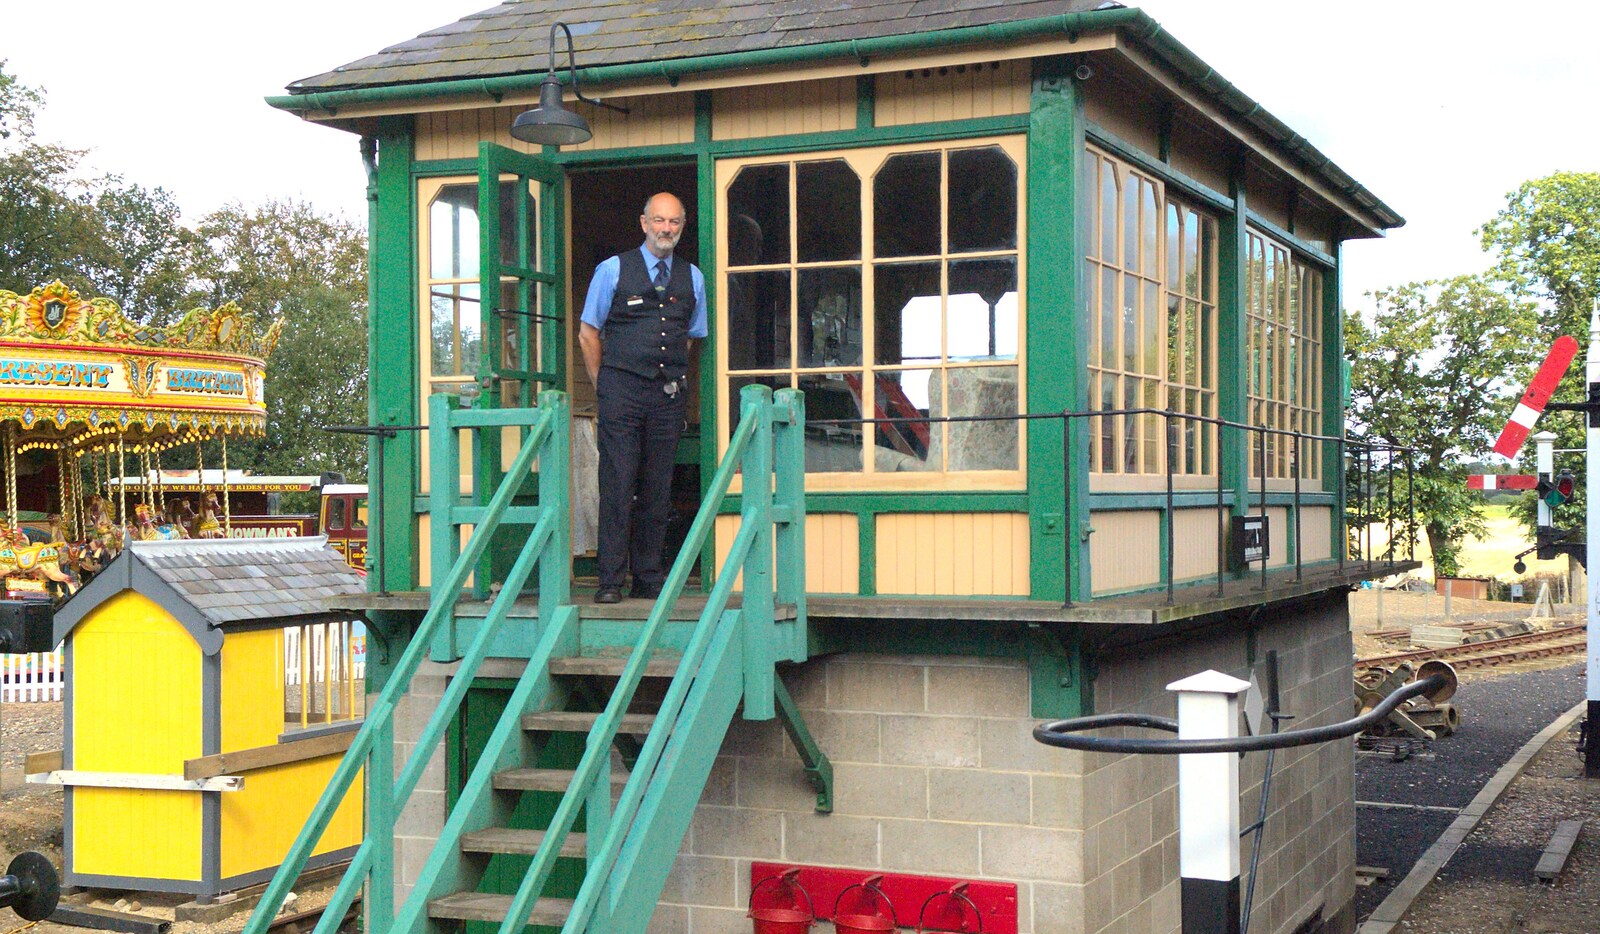 The signal box at Holt from The 1940s Steam Train Weekend, Holt, Norfolk - 18th September 2011